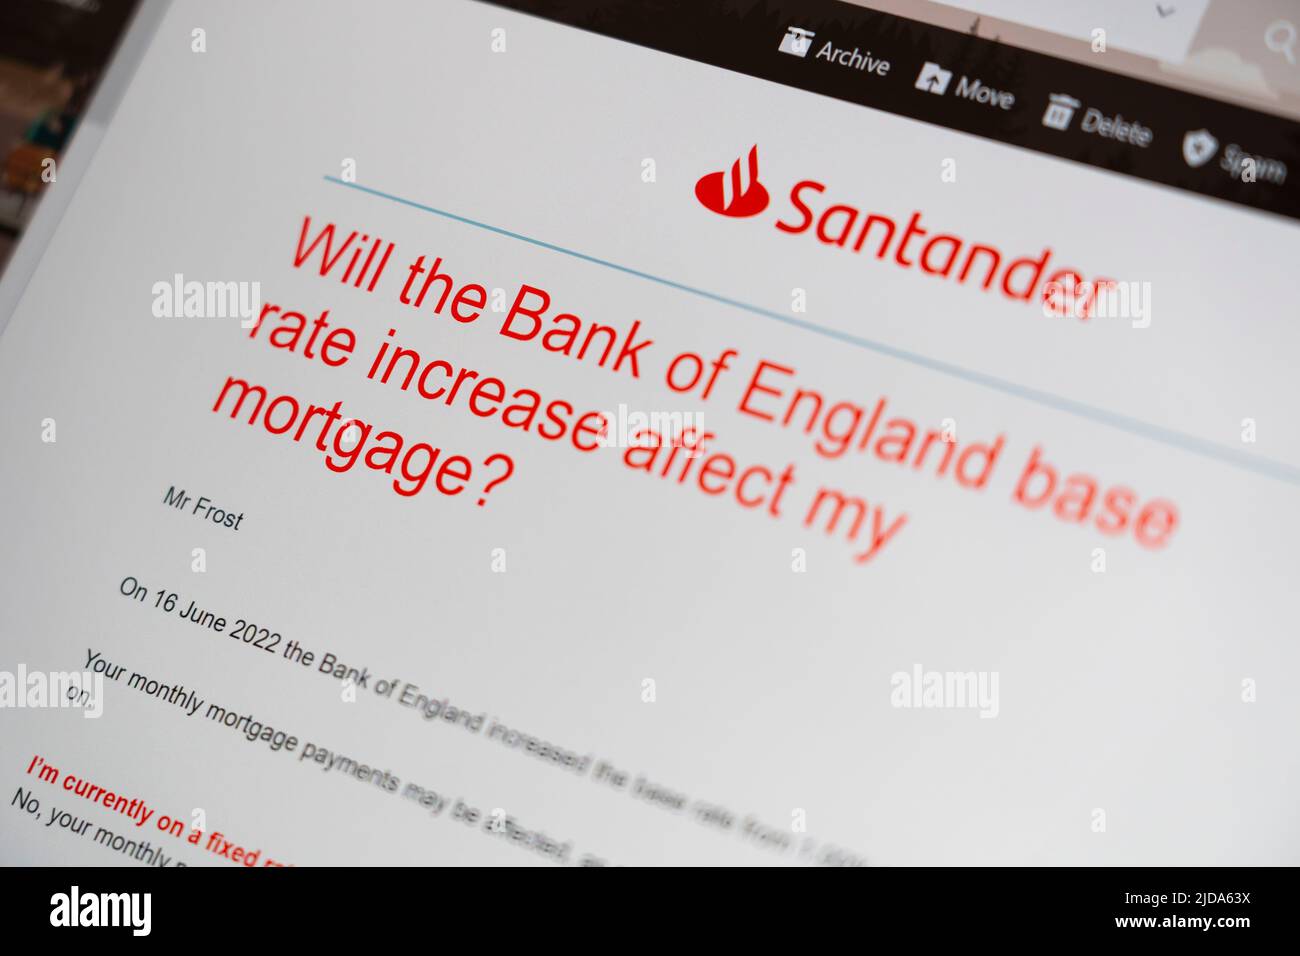 Email from Santander, a UK mortgage provider, warning the Bank of England voted on 16th June 2022 to increase the interest base rate from 1% to 1.25% Stock Photo